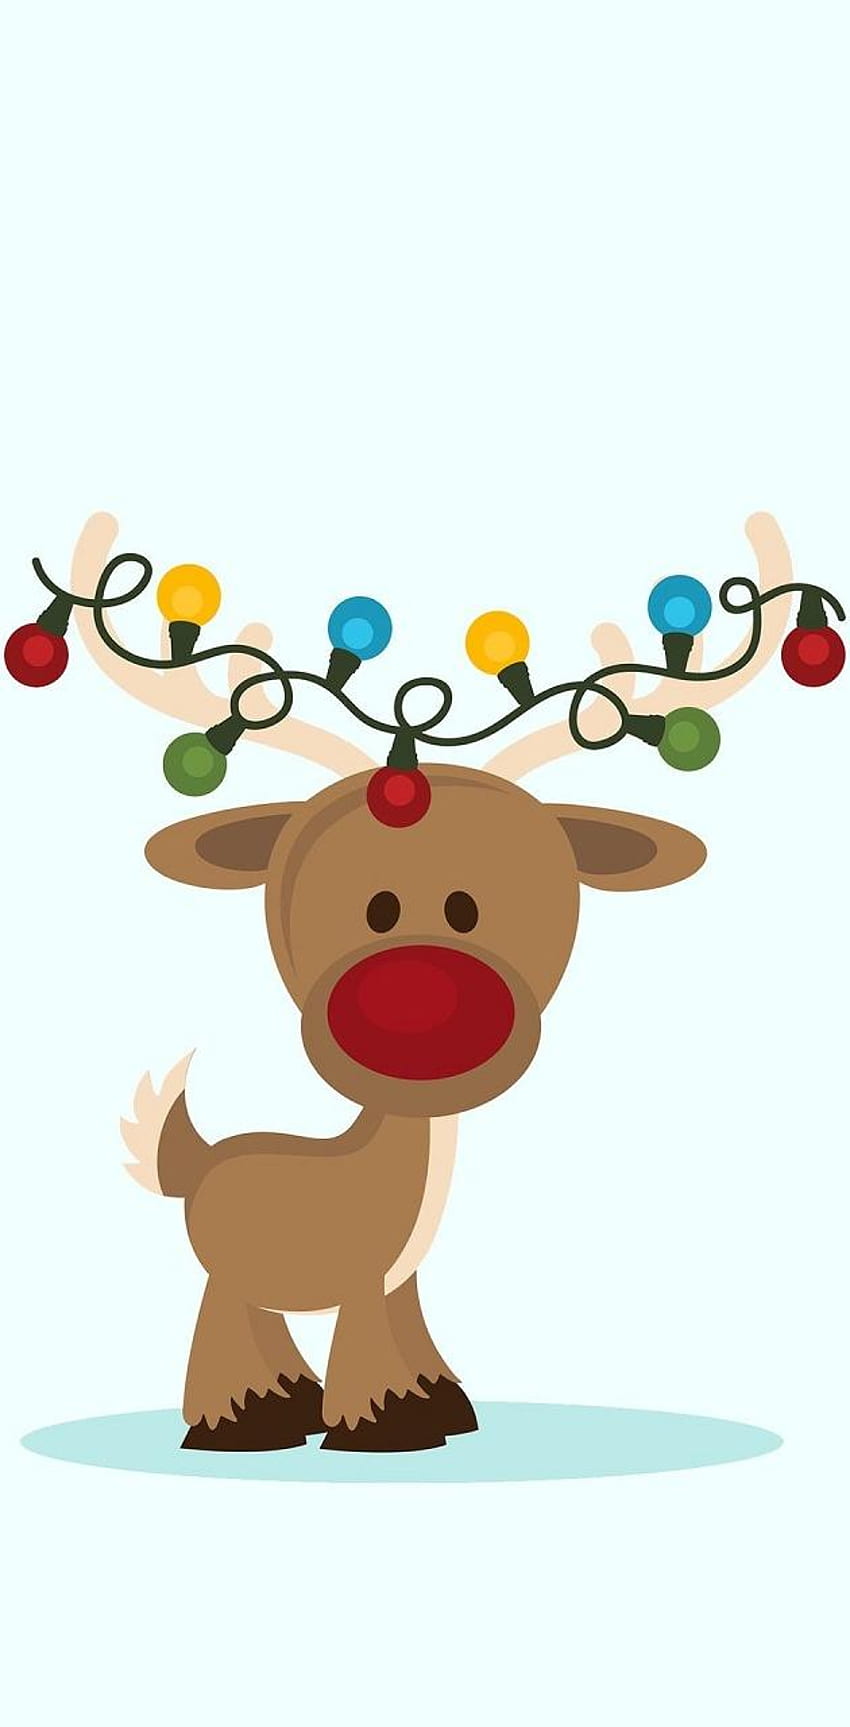 a cute rudolph wallpaper for the holidays feel free to use if you want   rAdoptMeRBX